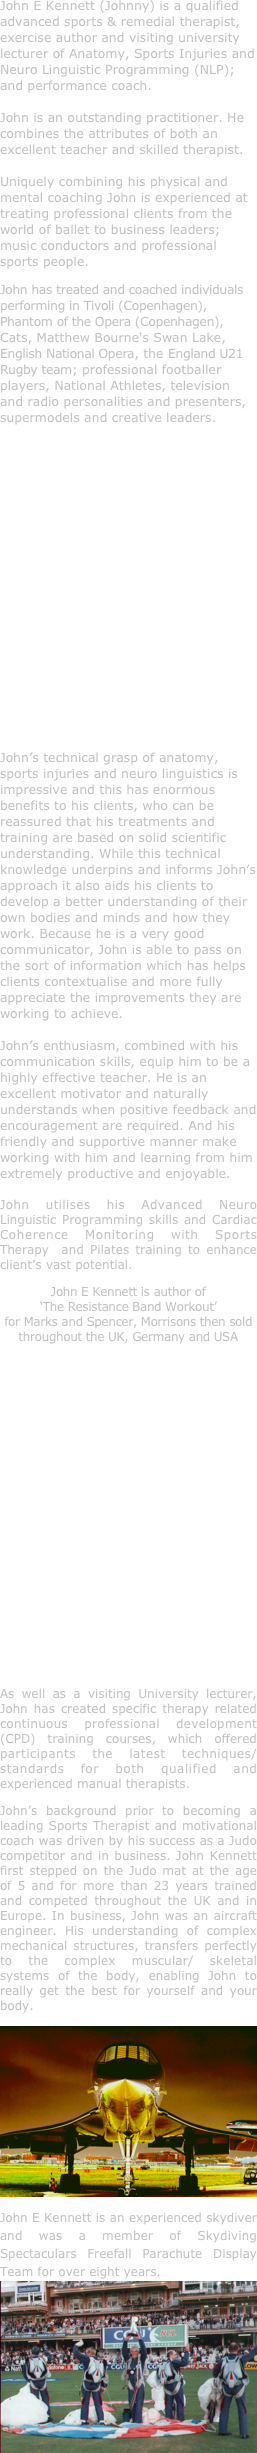 John E Kennett (Johnny) is a qualified advanced sports & remedial therapist, exercise author and visiting university lecturer of Anatomy, Sports Injuries and Neuro Linguistic Programming (NLP); and performance coach.
 
John is an outstanding practitioner. He combines the attributes of both an excellent teacher and skilled therapist. 

Uniquely combining his physical and mental coaching John is experienced at treating professional clients from the world of ballet to business leaders; music conductors and professional sports people.
John has treated and coached individuals performing in Tivoli (Copenhagen), Phantom of the Opera (Copenhagen), Cats, Matthew Bourne's Swan Lake, English National Opera, the England U21 Rugby team; professional footballer players, National Athletes, television and radio personalities and presenters, supermodels and creative leaders.












John’s technical grasp of anatomy, sports injuries and neuro linguistics is impressive and this has enormous benefits to his clients, who can be reassured that his treatments and training are based on solid scientific understanding. While this technical knowledge underpins and informs John’s approach it also aids his clients to develop a better understanding of their own bodies and minds and how they work. Because he is a very good communicator, John is able to pass on the sort of information which has helps clients contextualise and more fully appreciate the improvements they are working to achieve. 

John’s enthusiasm, combined with his communication skills, equip him to be a highly effective teacher. He is an excellent motivator and naturally understands when positive feedback and encouragement are required. And his friendly and supportive manner make working with him and learning from him extremely productive and enjoyable.

John utilises his Advanced Neuro Linguistic Programming skills and Cardiac Coherence Monitoring with Sports Therapy  and Pilates training to enhance client’s vast potential.
John E Kennett is author of  
‘The Resistance Band Workout’
for Marks and Spencer, Morrisons then sold throughout the UK, Germany and USA














As well as a visiting University lecturer, John has created specific therapy related continuous professional development (CPD) training courses, which offered participants the latest techniques/standards for both qualified and experienced manual therapists.
John’s background prior to becoming a leading Sports Therapist and motivational coach was driven by his success as a Judo competitor and in business. John Kennett first stepped on the Judo mat at the age of 5 and for more than 23 years trained and competed throughout the UK and in Europe. In business, John was an aircraft engineer. His understanding of complex mechanical structures, transfers perfectly to the complex muscular/ skeletal systems of the body, enabling John to really get the best for yourself and your body.
￼
John E Kennett is an experienced skydiver and was a member of Skydiving Spectaculars Freefall Parachute Display Team for over eight years.
￼